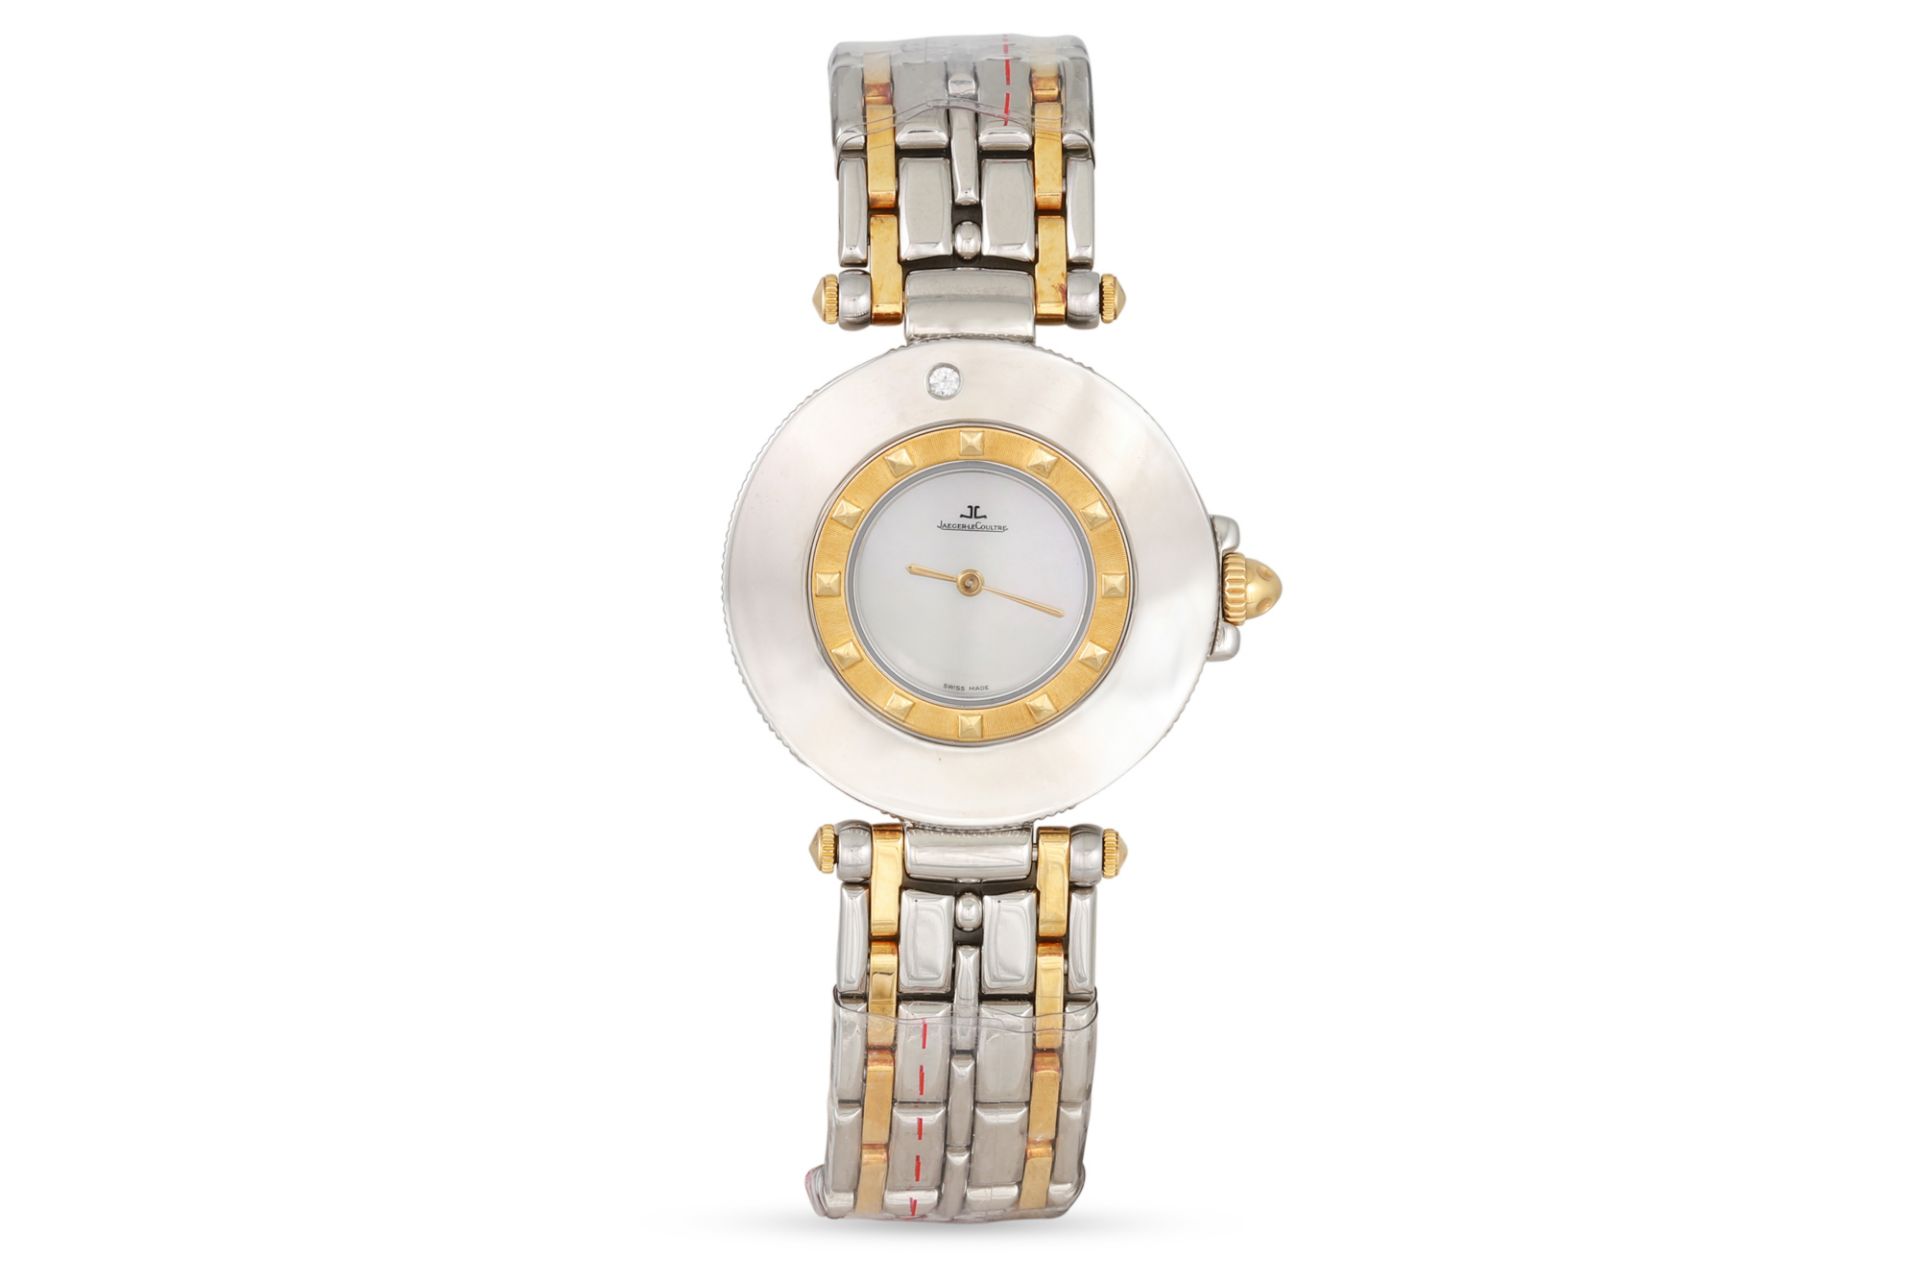 A LADY'S JAEGER- LE COULTRE STAINLESS STEEL BI-METAL RENDEZ - VOUS WRIST WATCH, mother-of-pearl